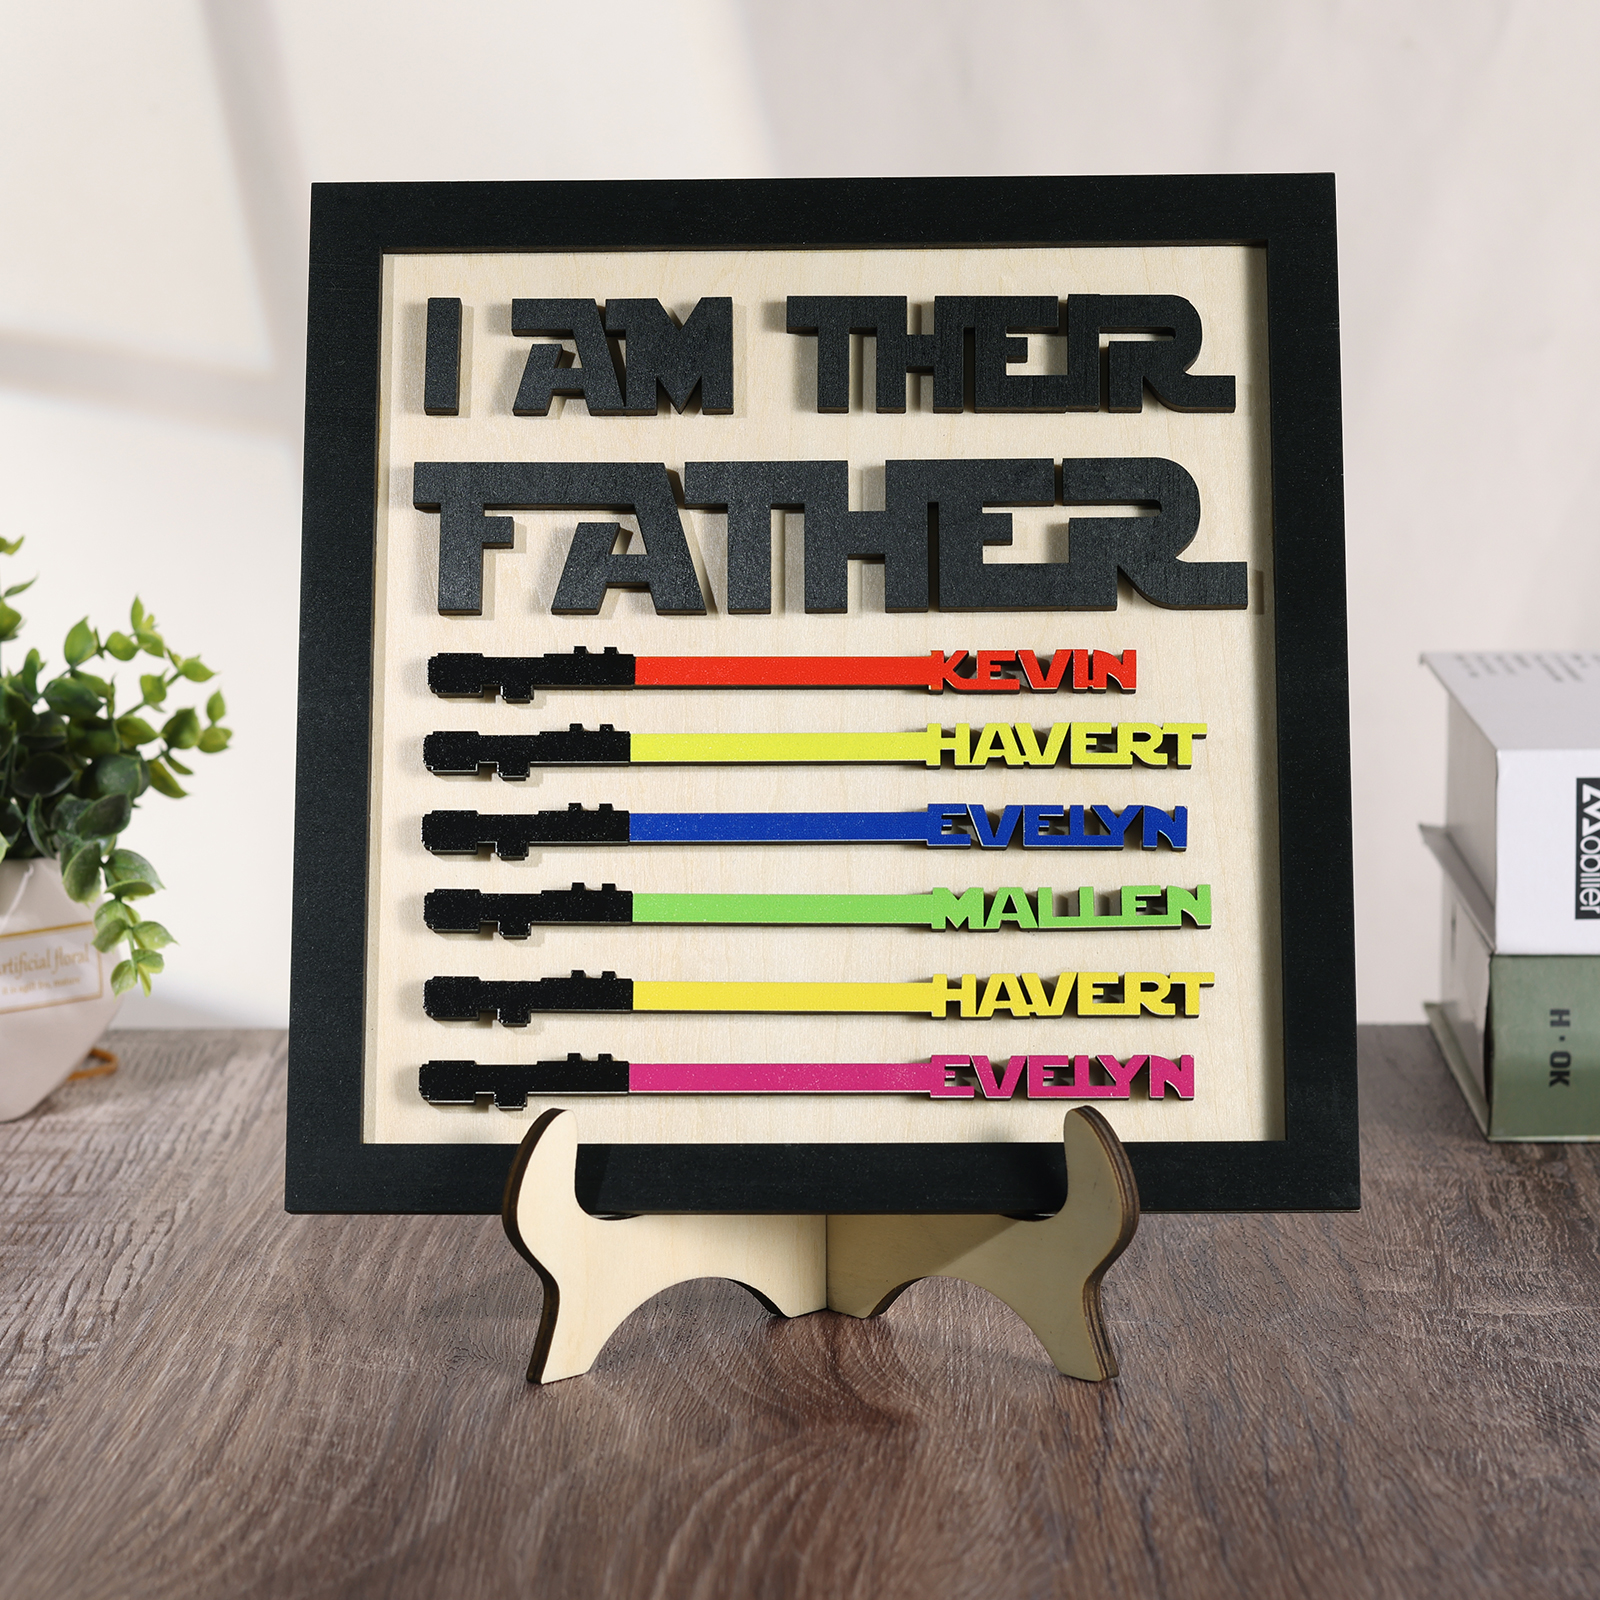 Personalized Star Wars Sign Father's Day Gifts - I AM THEIR FATHER - Wood Sign with 6 Names